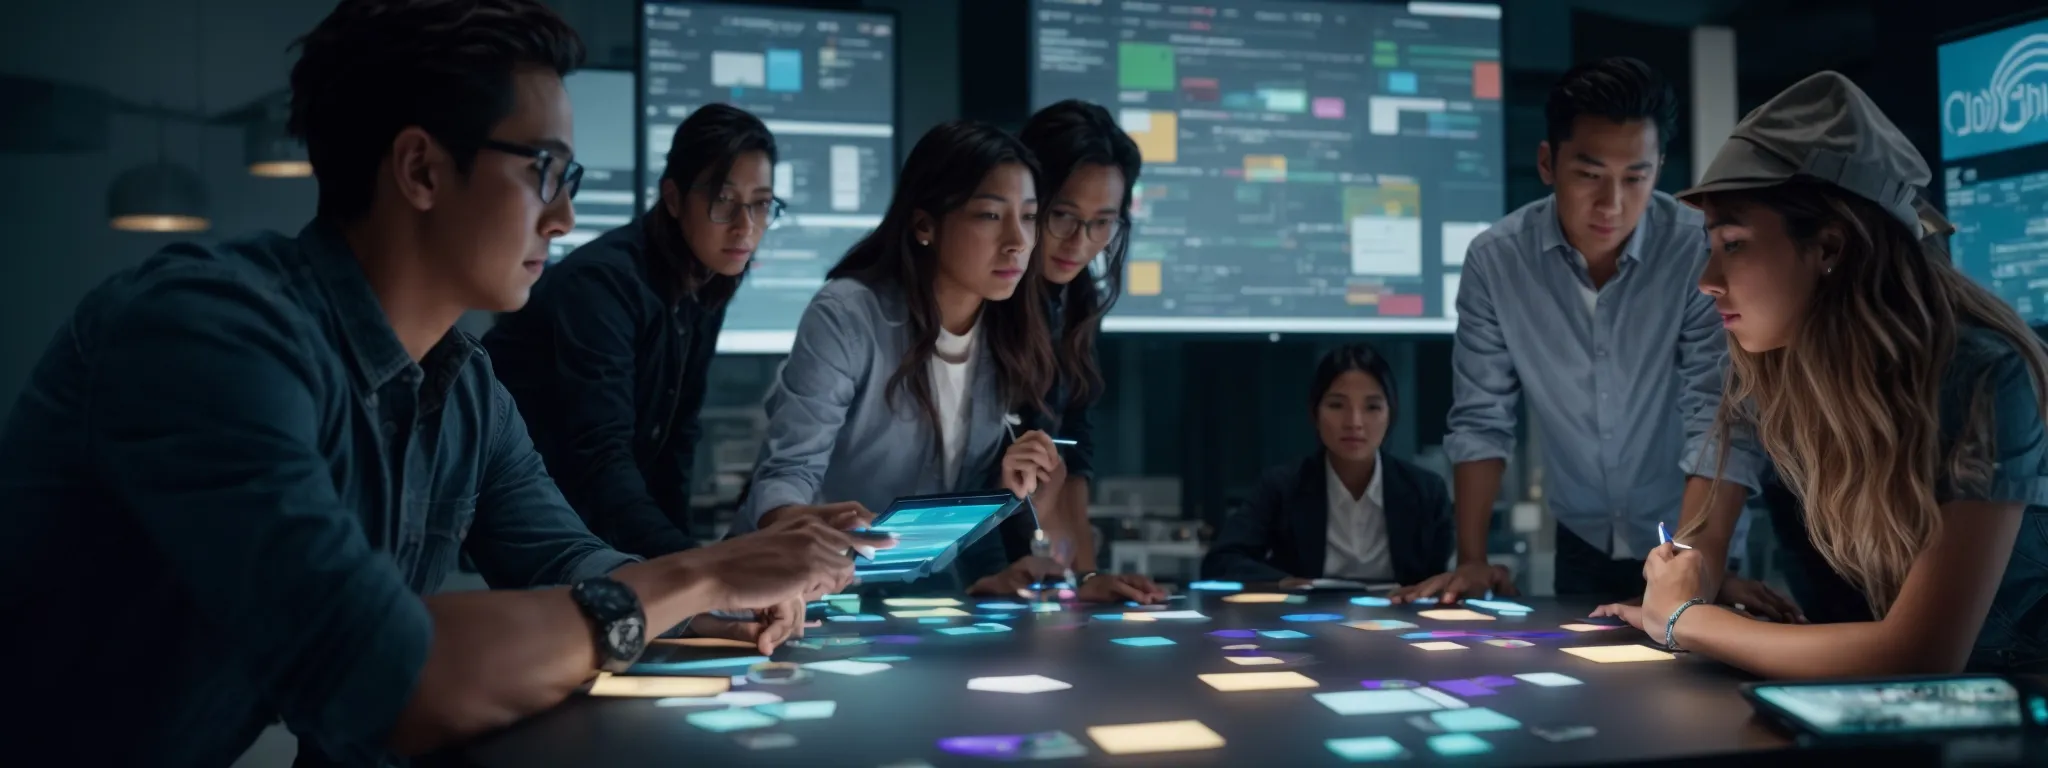 a group of creative professionals brainstorming around a high-tech digital table with multiple glowing screens displaying colorful social media analytics.